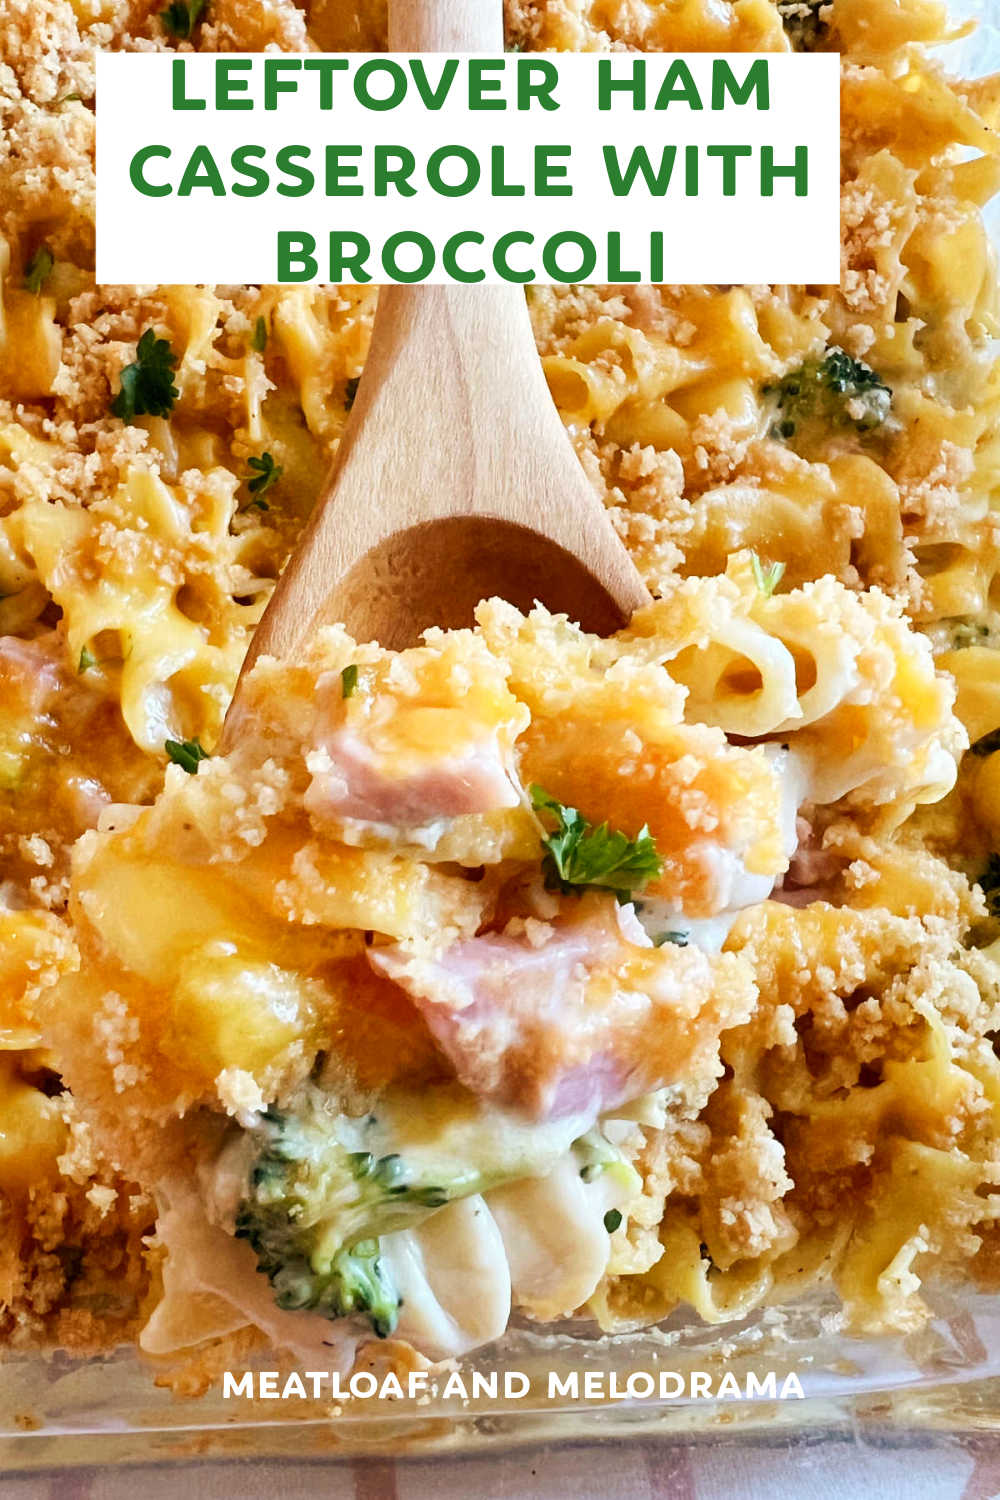 Leftover Ham Casserole made with egg noodles, cheese and broccoli in a creamy sauce is the perfect way to use up leftover holiday ham. This easy recipe makes a delicious dinner for busy weeknights. Your whole family will love this easy dinner! via @meamel